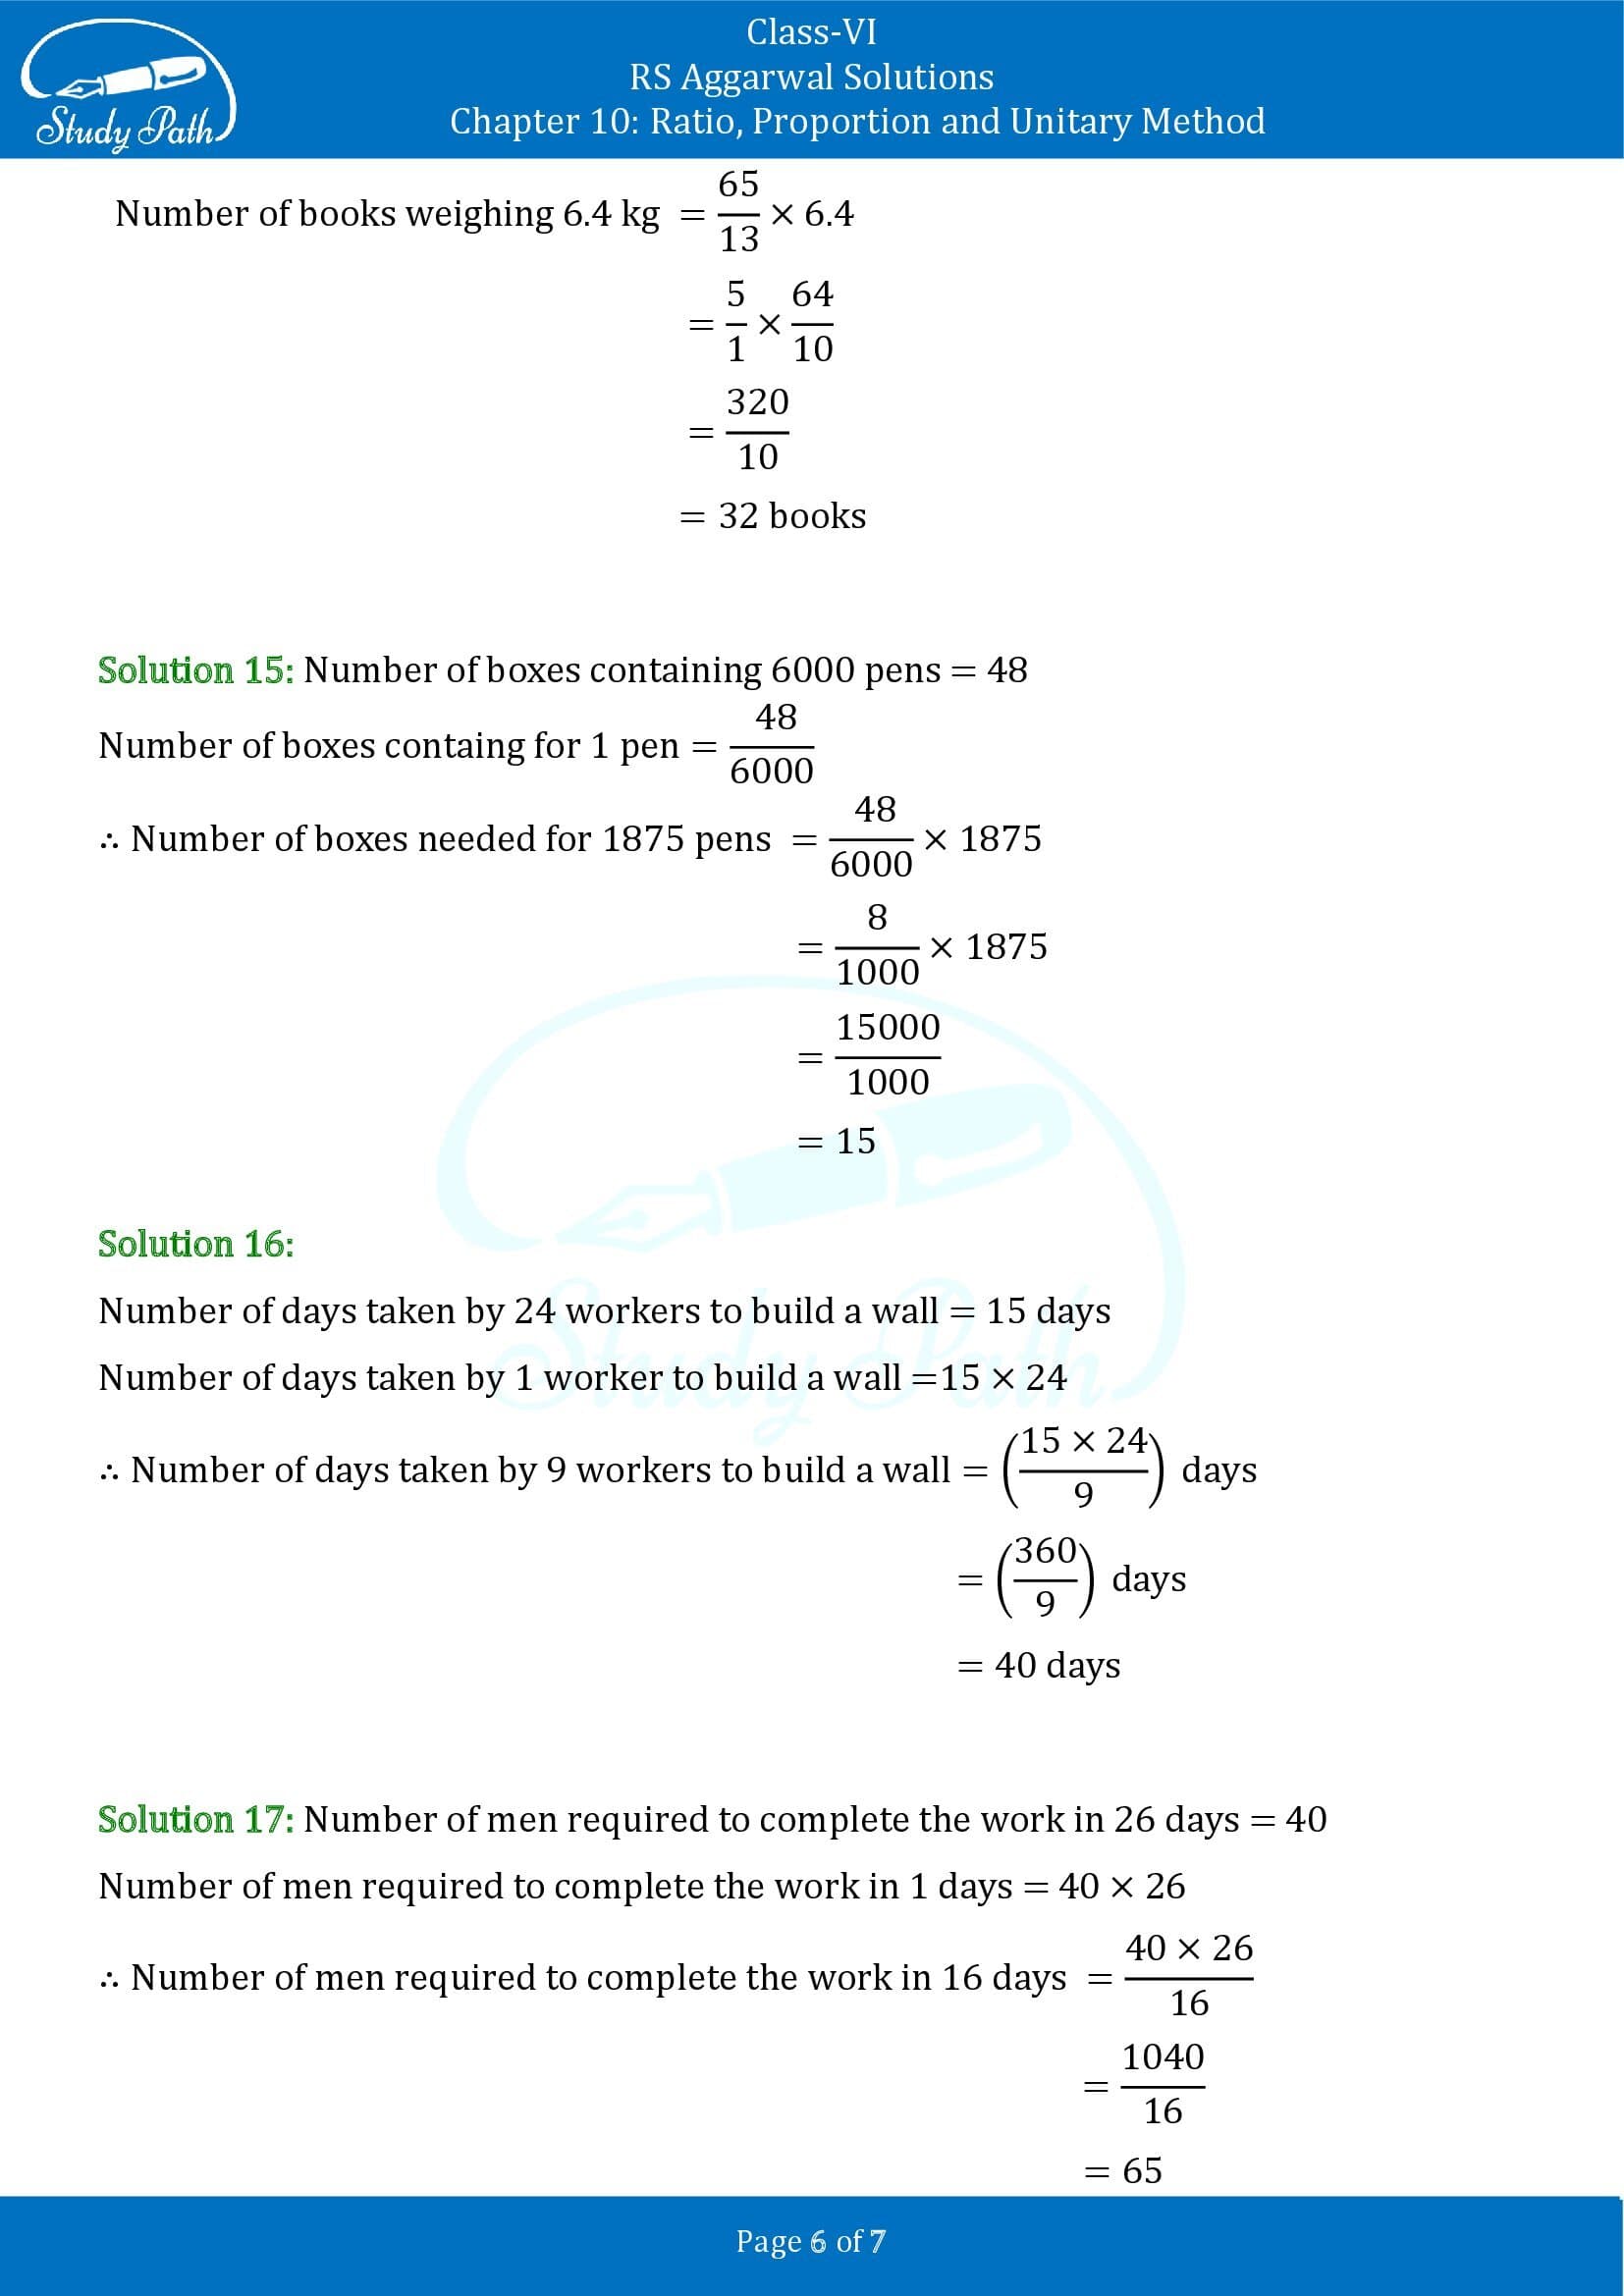 RS Aggarwal Solutions Class 6 Chapter 10 Ratio Proportion and Unitary Method Exercise 10C 00006